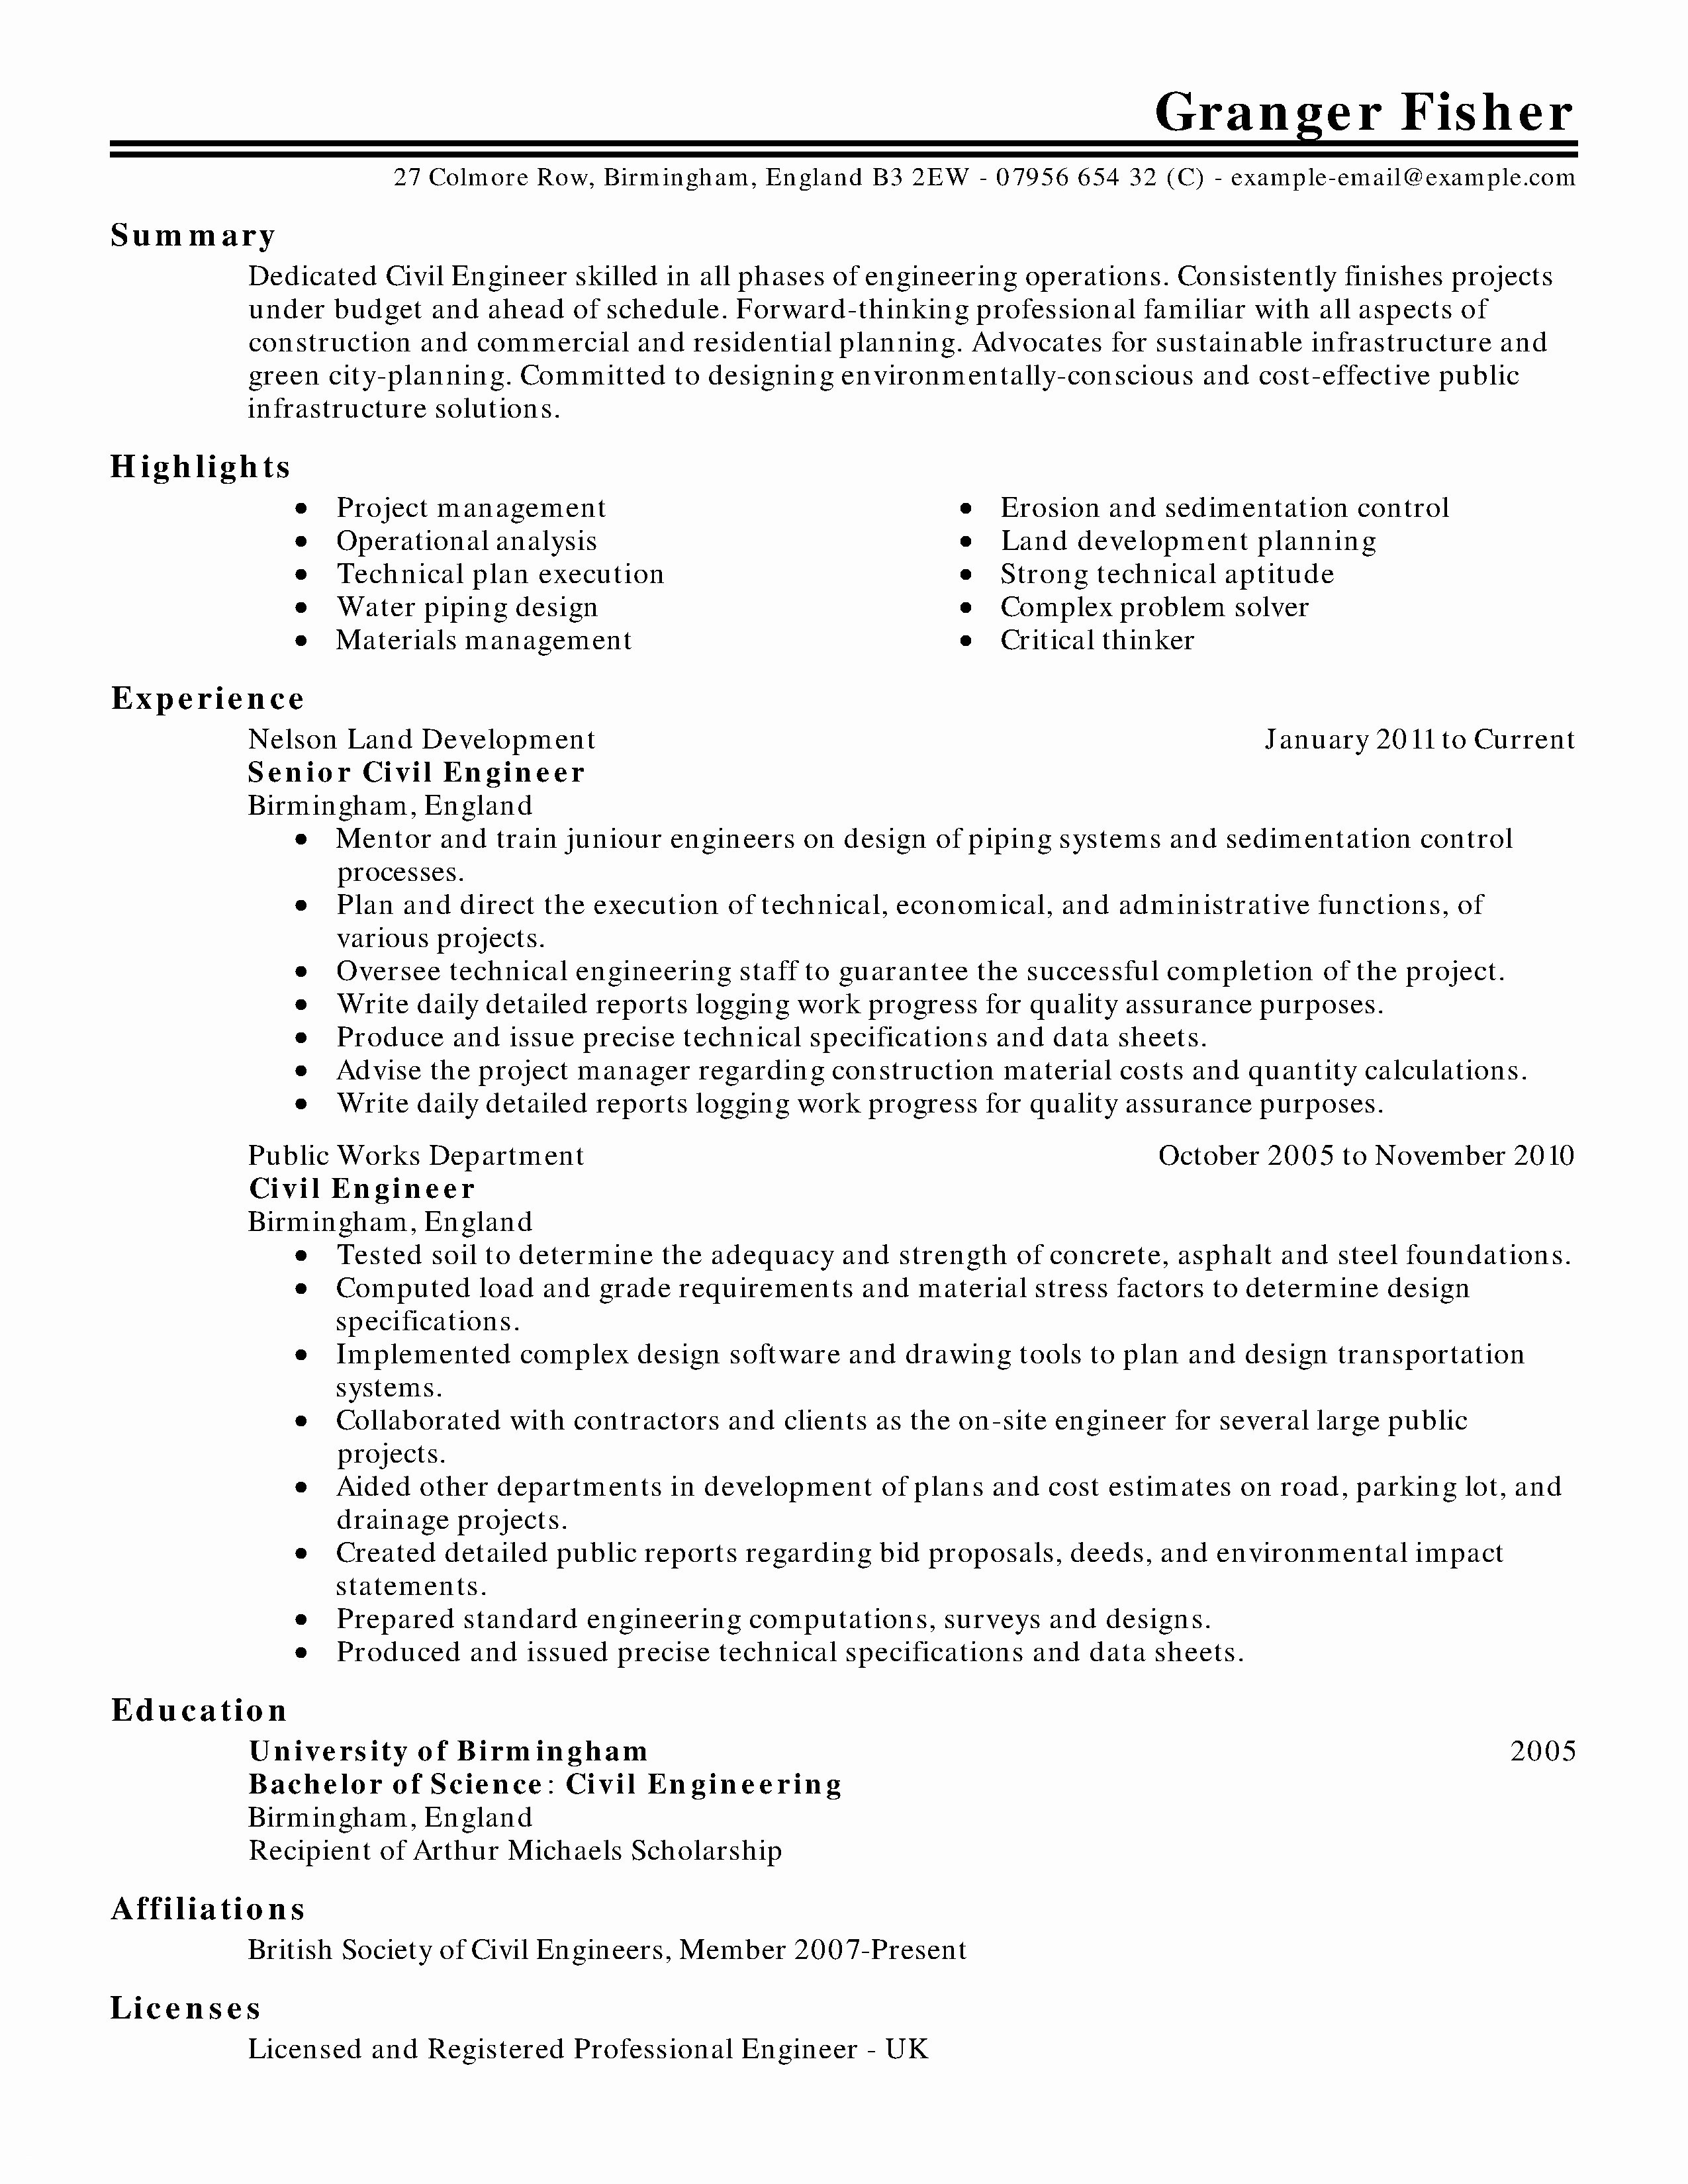 mortgage loan approval letter template example-Graphic Resume Templates Lovely Free Professional Resume Template Downloads Luxury Od Specialist 20-i